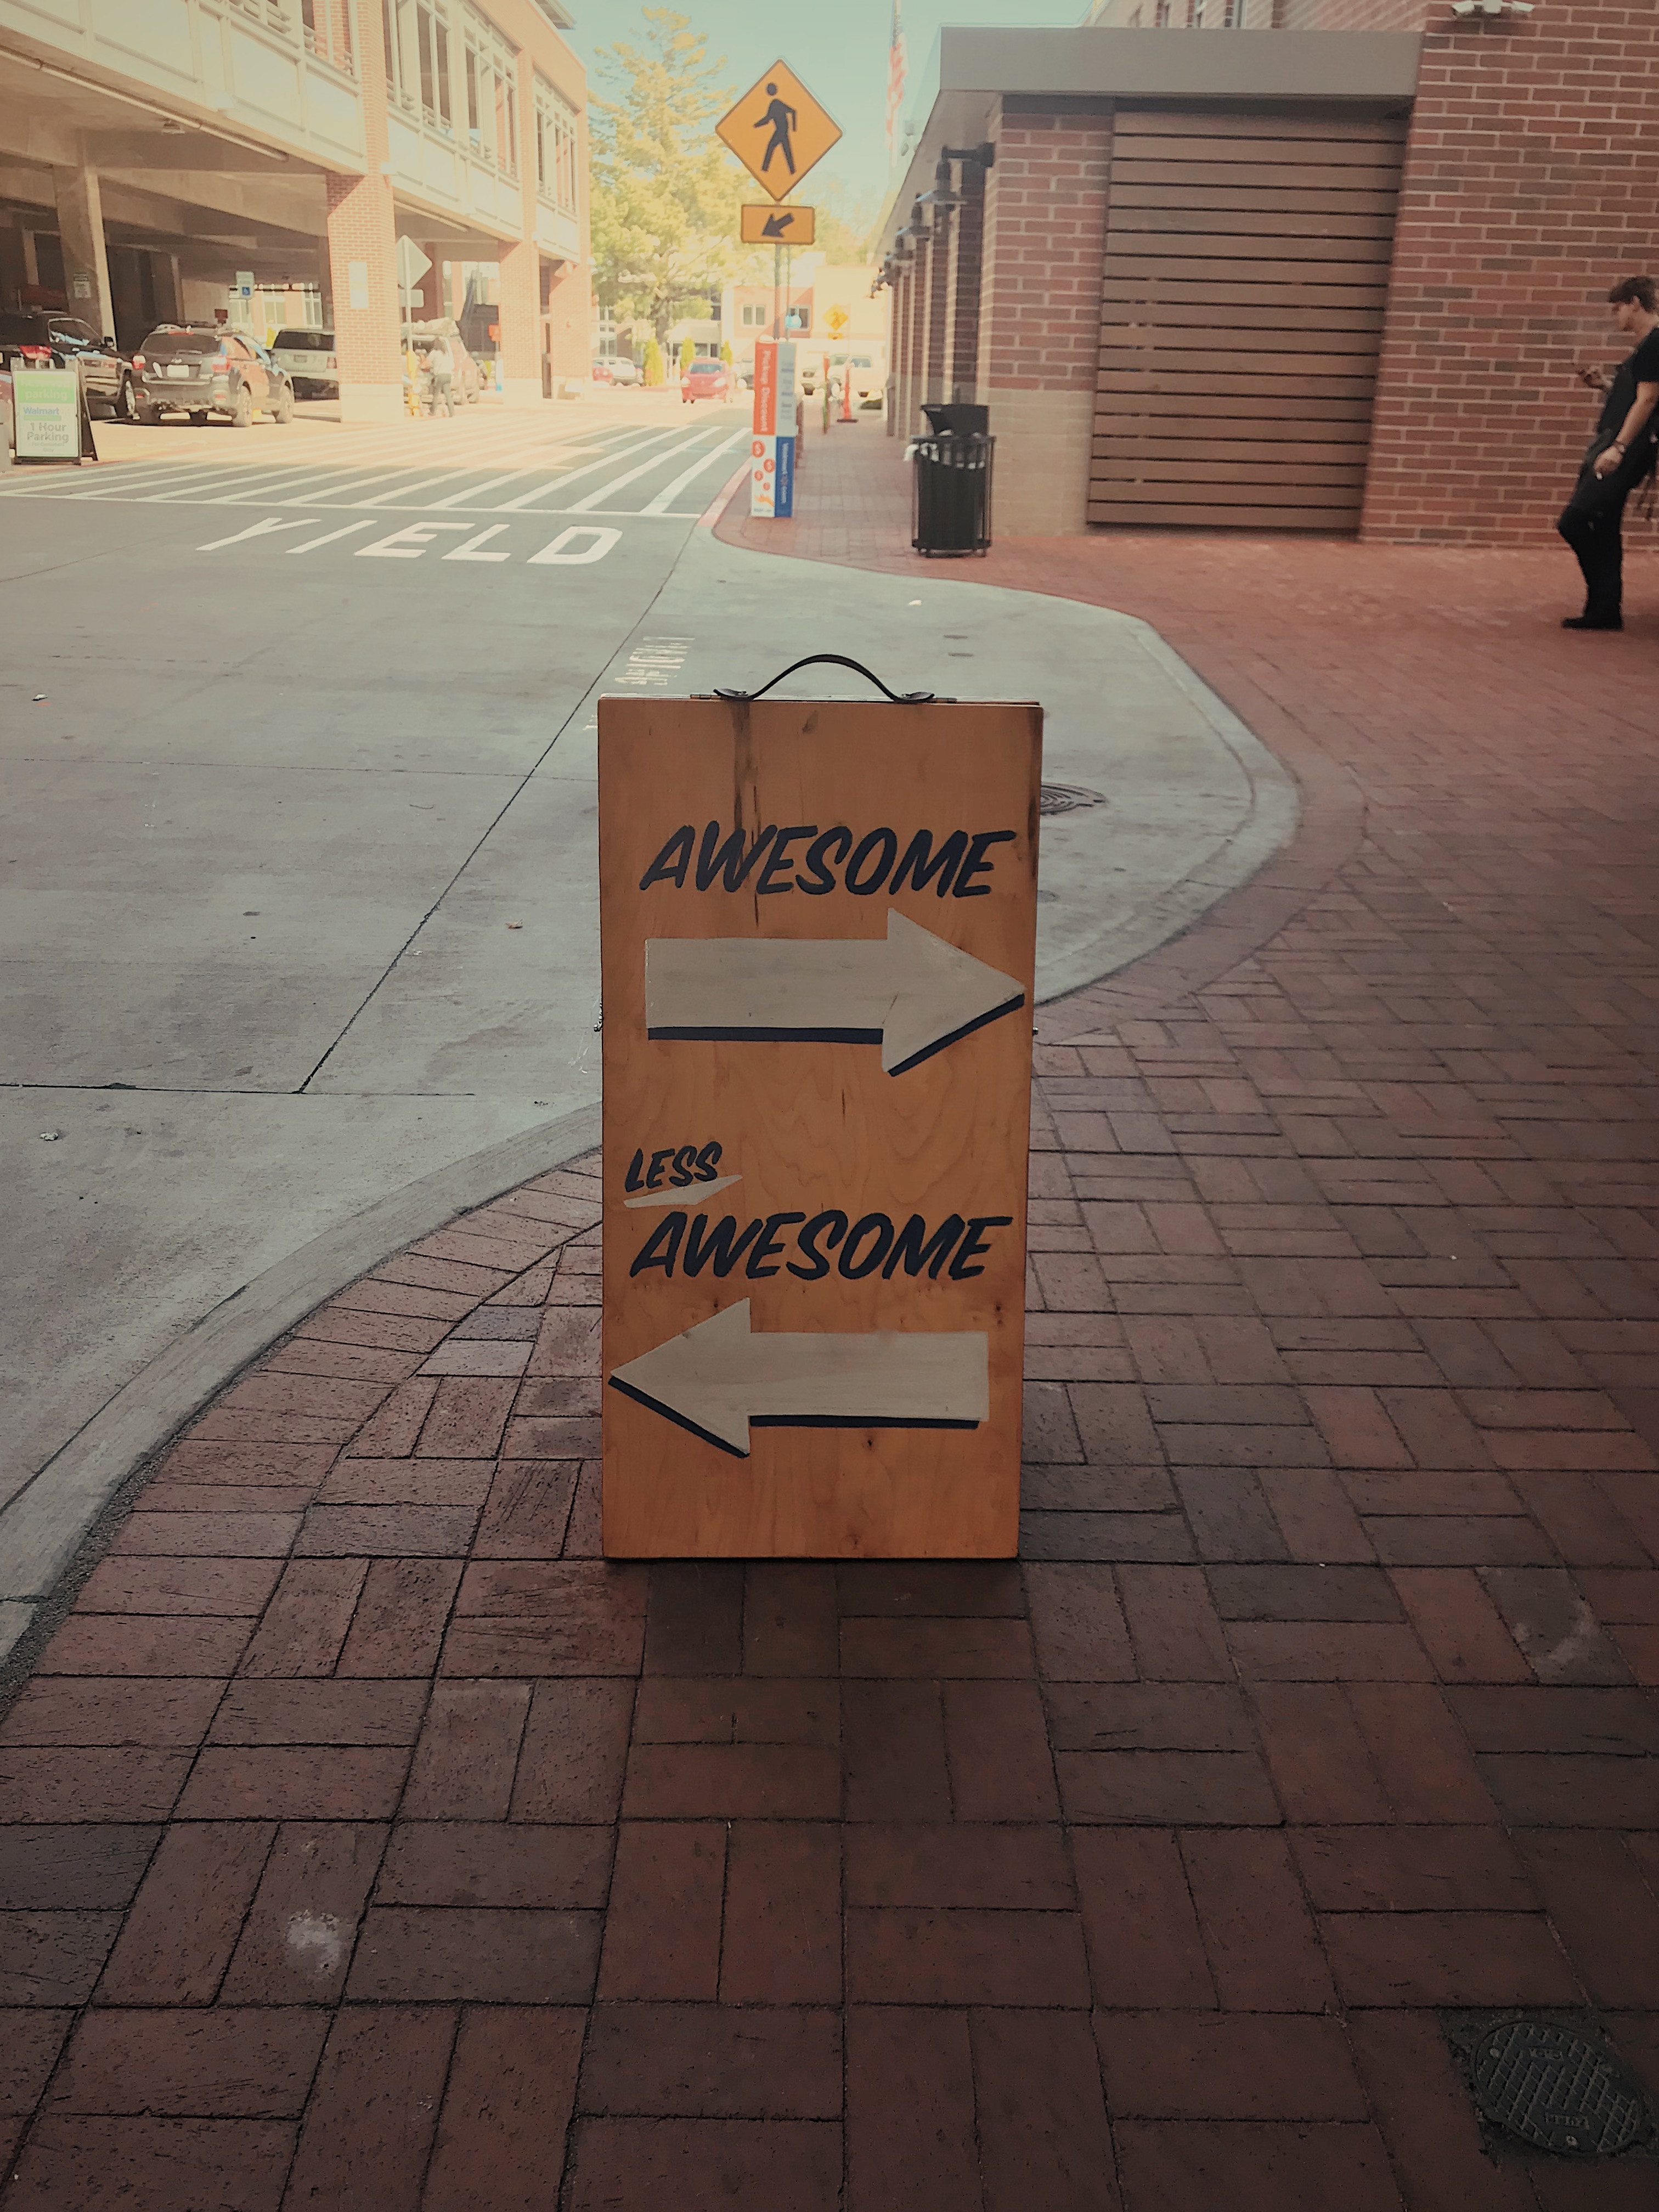 a sign that says awesome above a right pointing arrow, and less awesome above a left pointing arrow